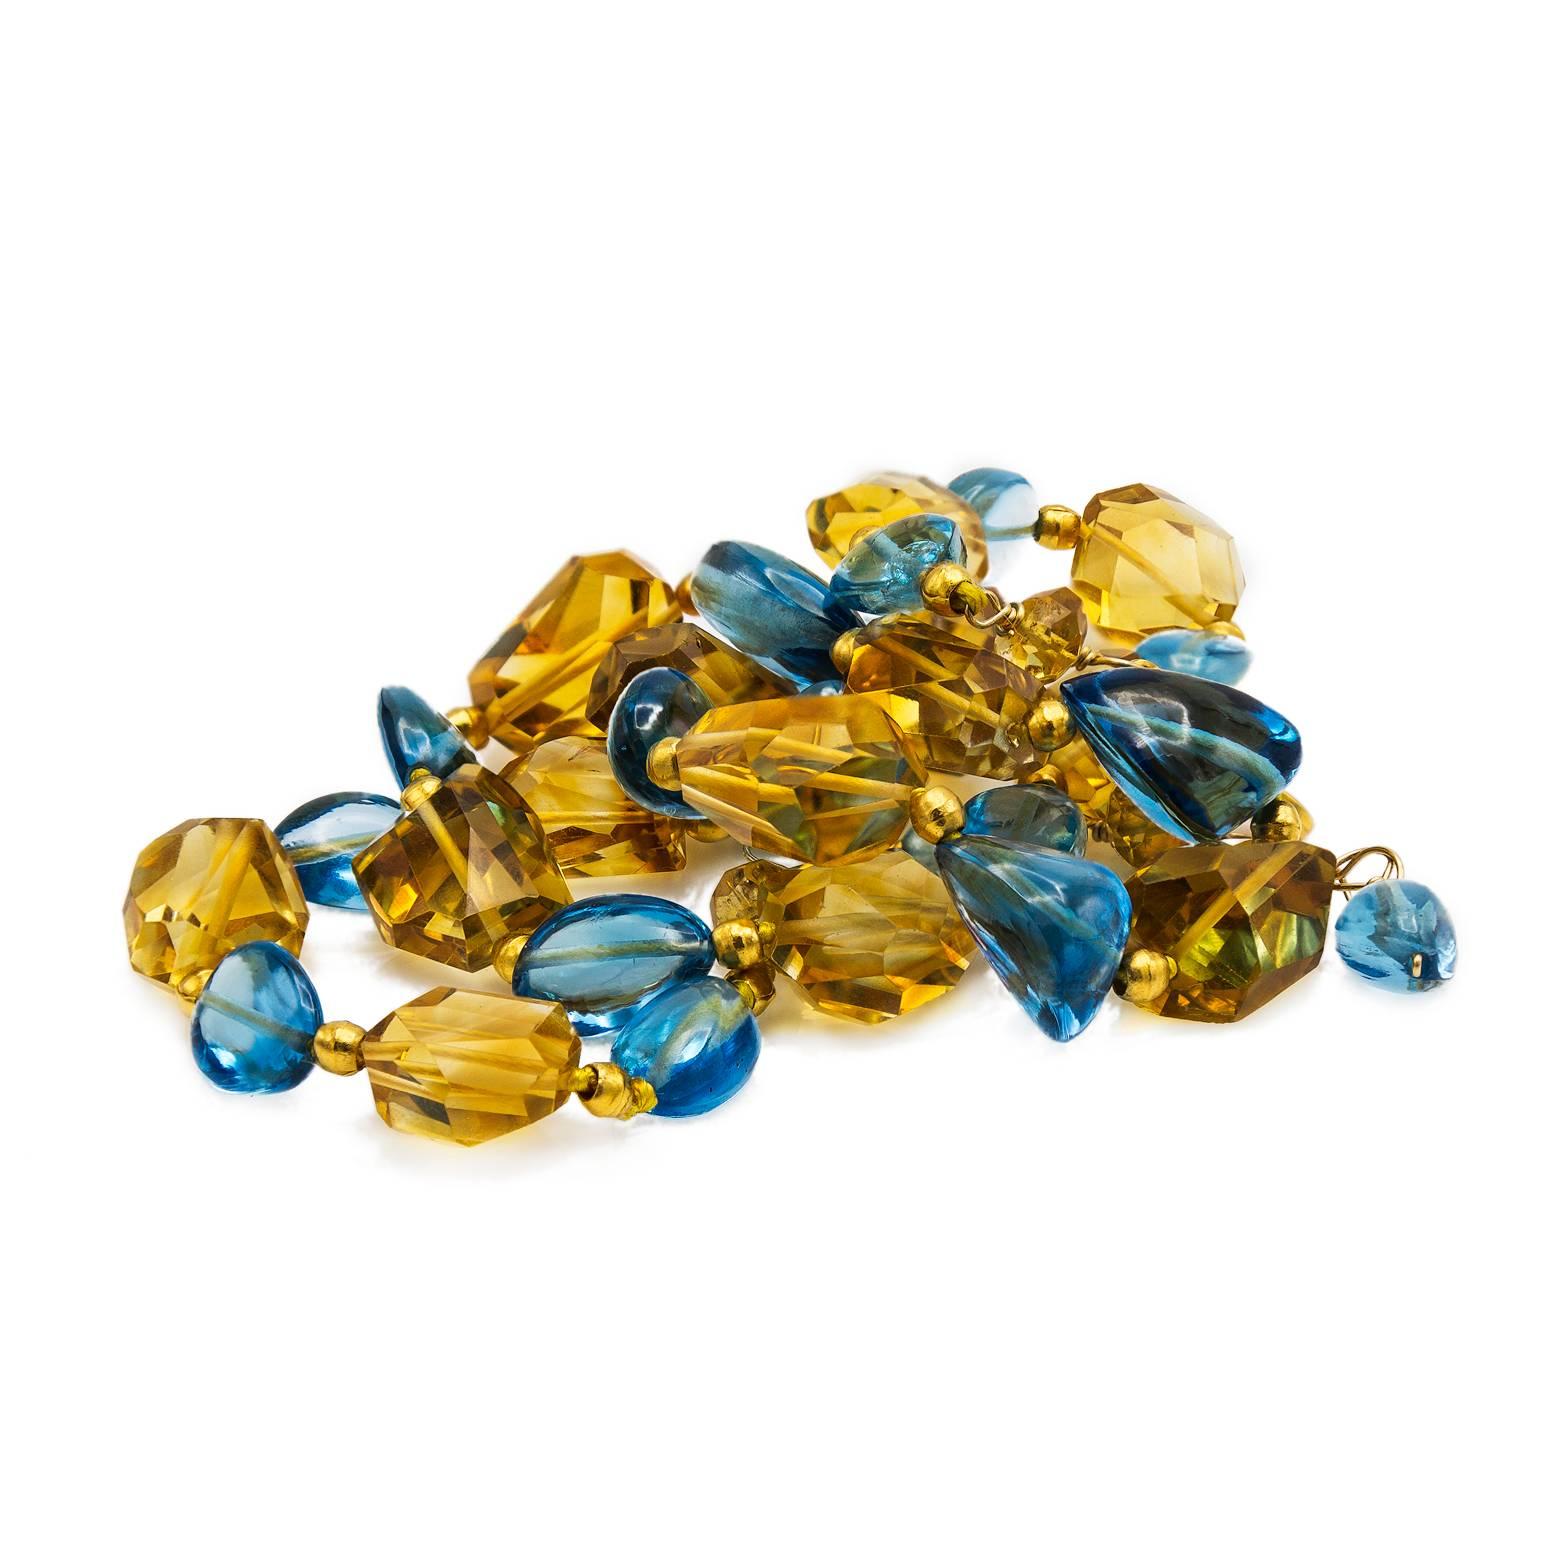 Modern Blue Topaz Citrine Faceted Baroque Bead Necklace